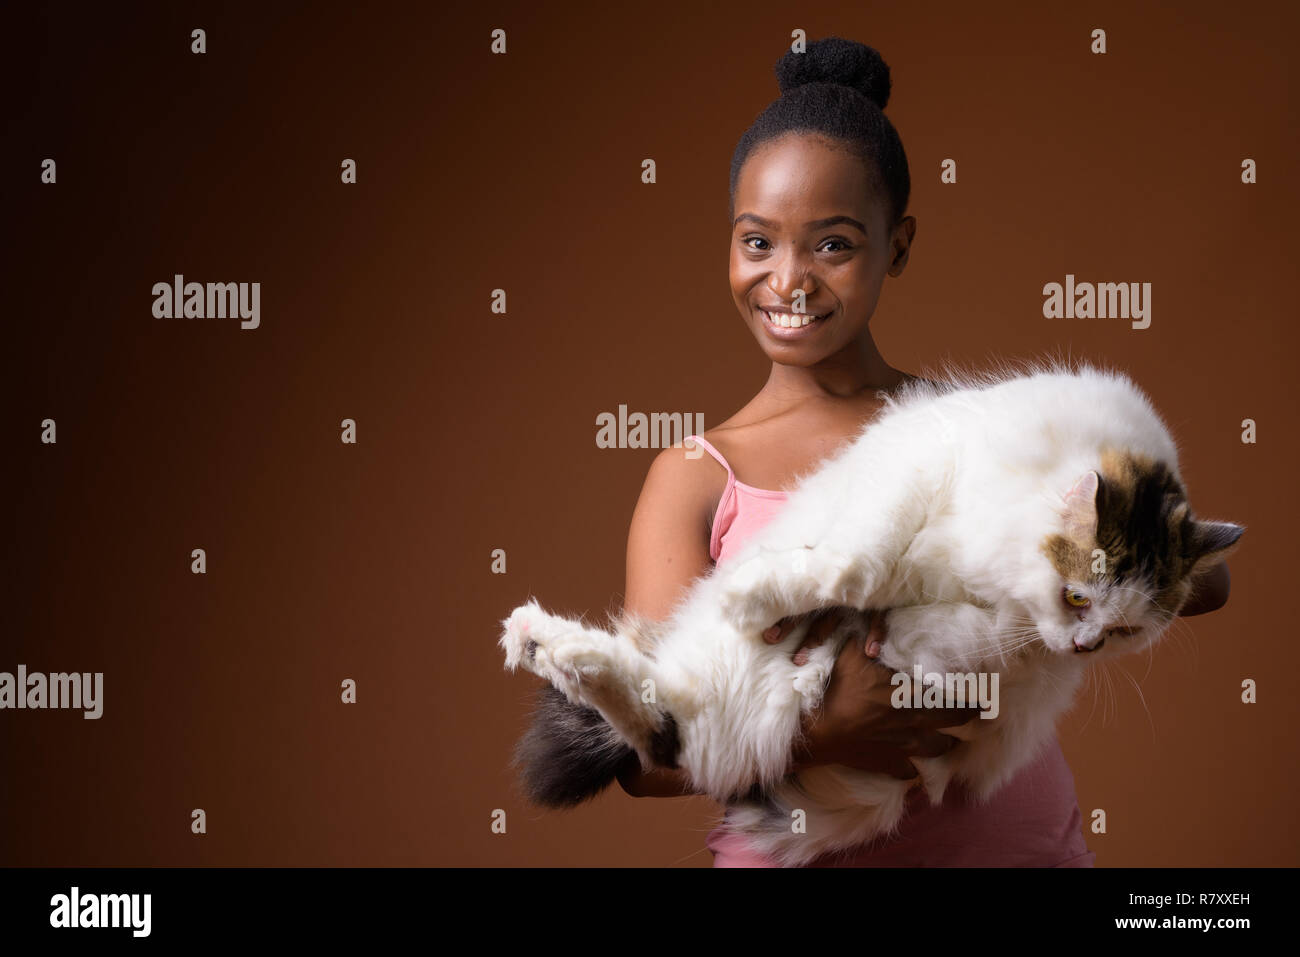 Young beautiful African Zulu woman holding cat while smiling Stock Photo